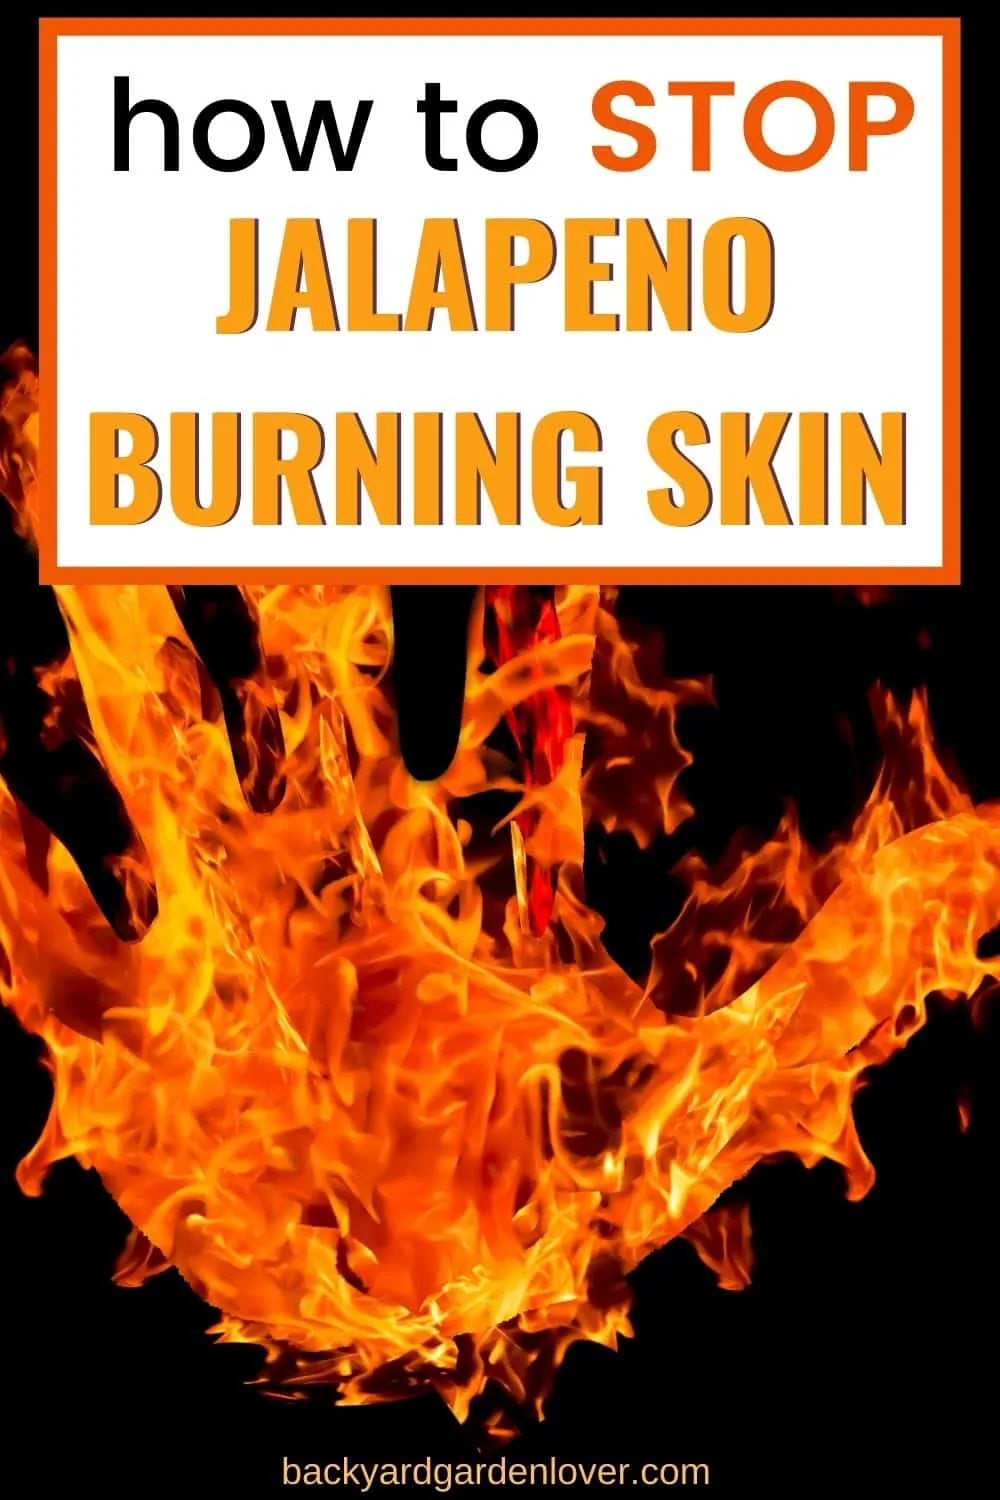 How to stop jalapeno burning skin - Pinterest picture